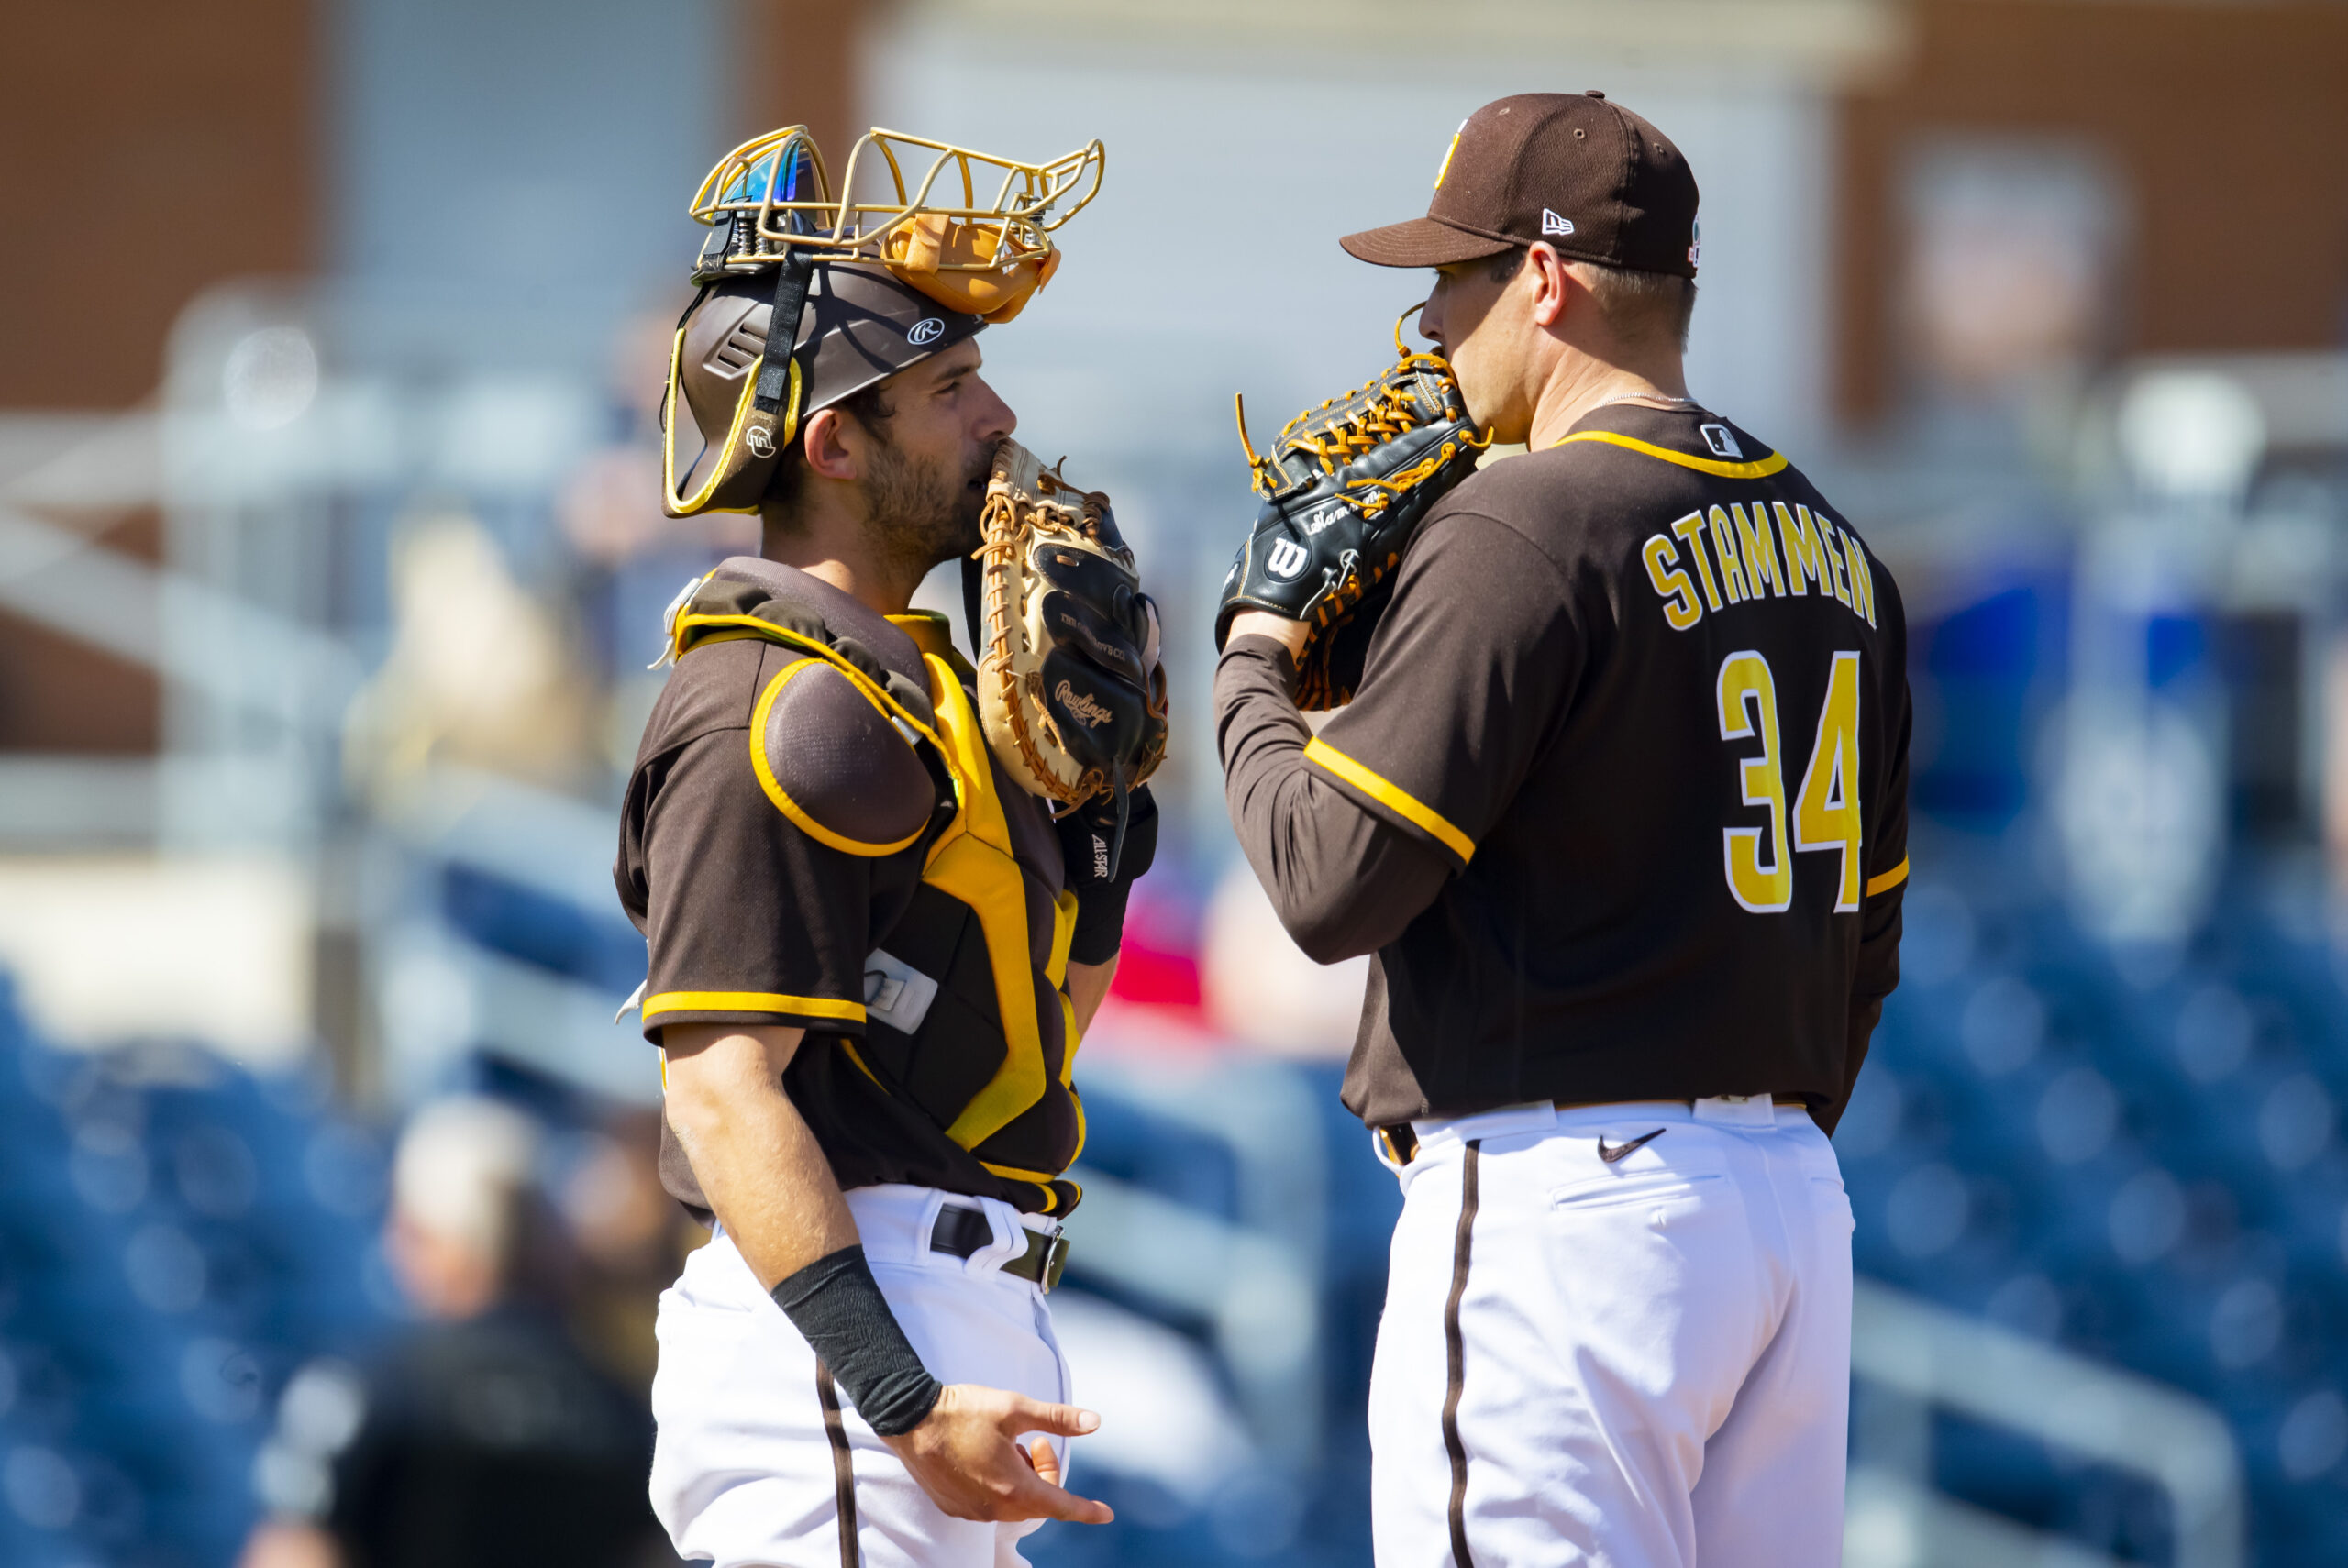 Assessing the Padres' situation at catcher